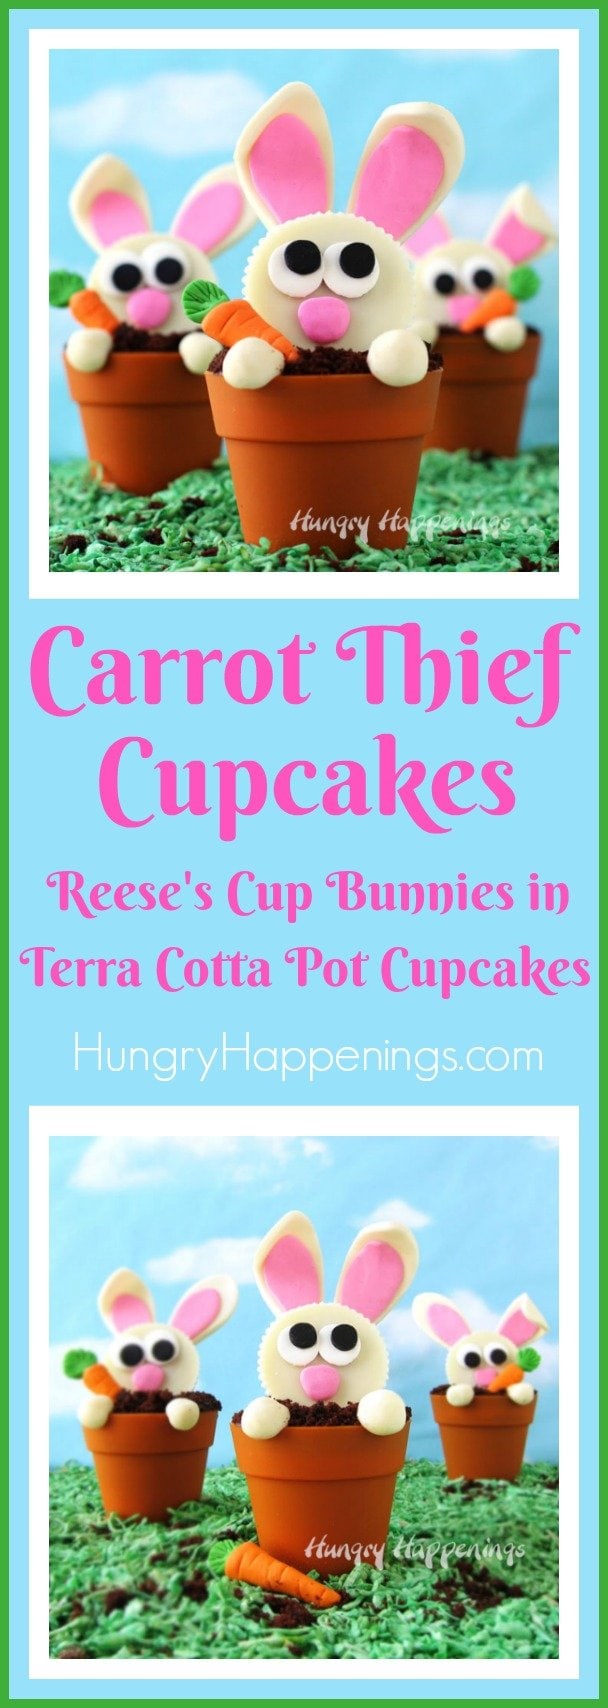 Mischievous little Reese's Cup Bunnies have been digging around in my Terra Cotta Pot Cupcakes looking for candy clay carrots. I can't be mad because these Carrot Thief Cupcakes are just so delightful and will make such darling desserts for Easter.